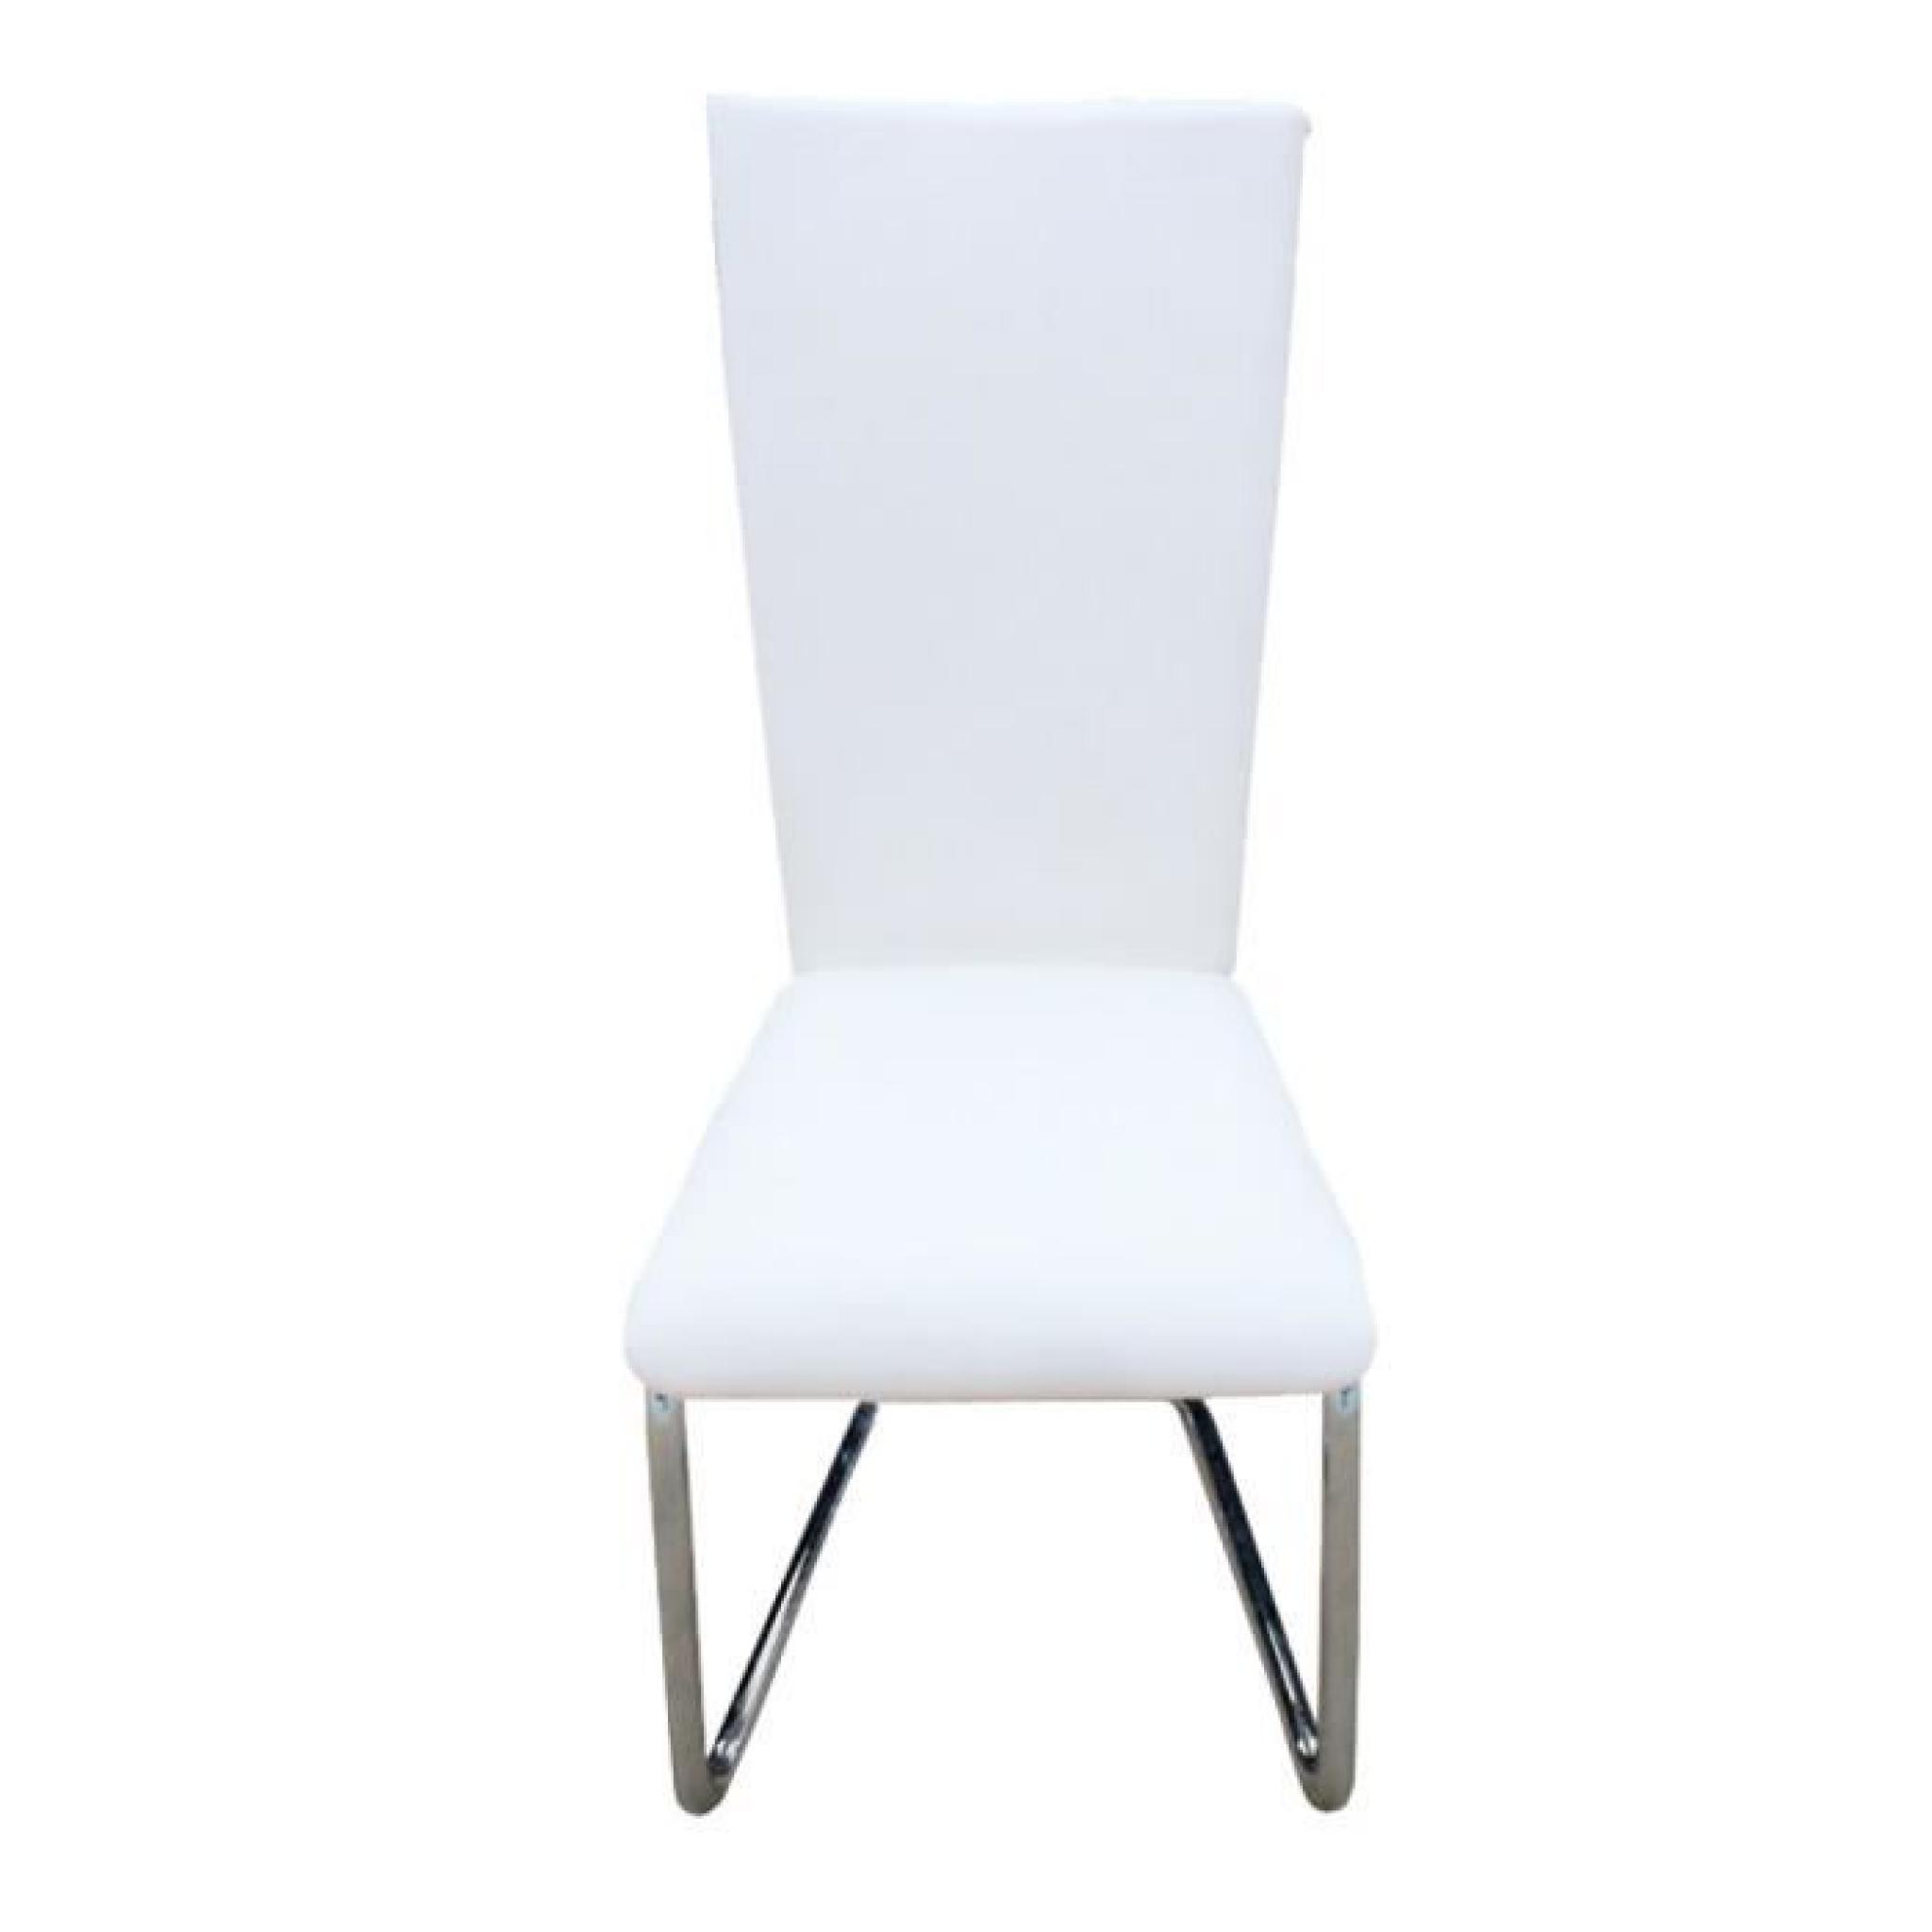 2 chaises ultra design blanches pas cher